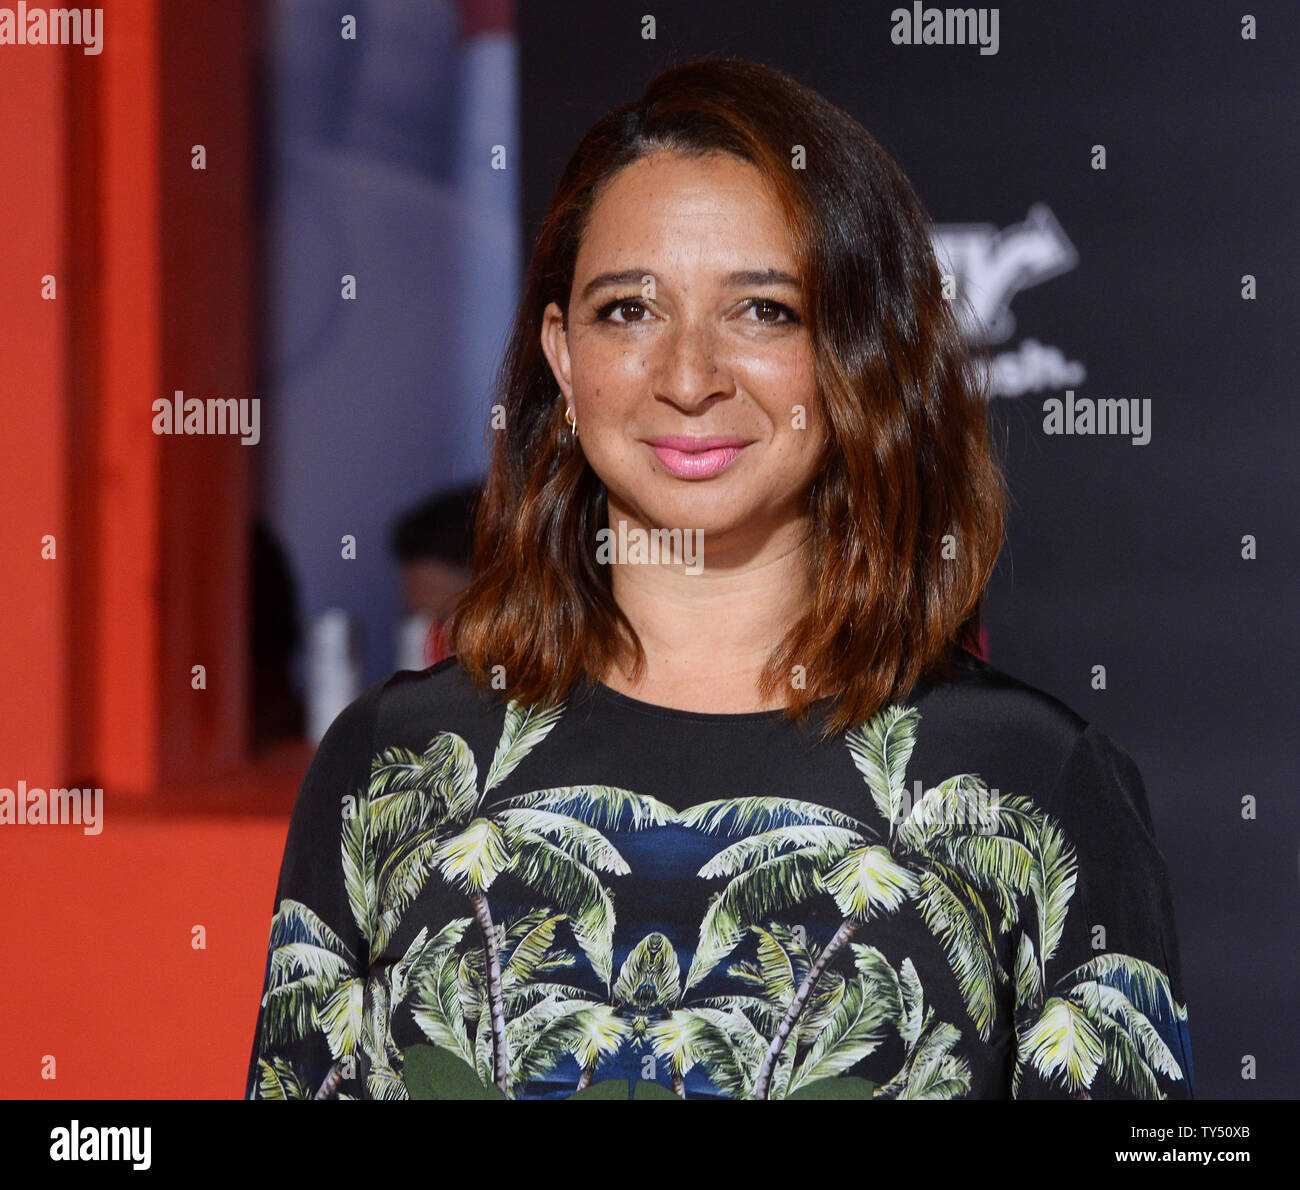 Cast member Maya Rudolph, the voice of Cass attends the premiere of the animated sci-fi motion picture comedy "Big Hero 6" premiere at the El Capitan Theatre in the Hollywood section of Los Angeles on November 4, 2014. Storyline: is an action-packed comedy-adventure about the special bond that develops between Baymax, a plus-sized inflatable robot, and prodigy Hiro Hamada.  UPI/Jim Ruymen Stock Photo